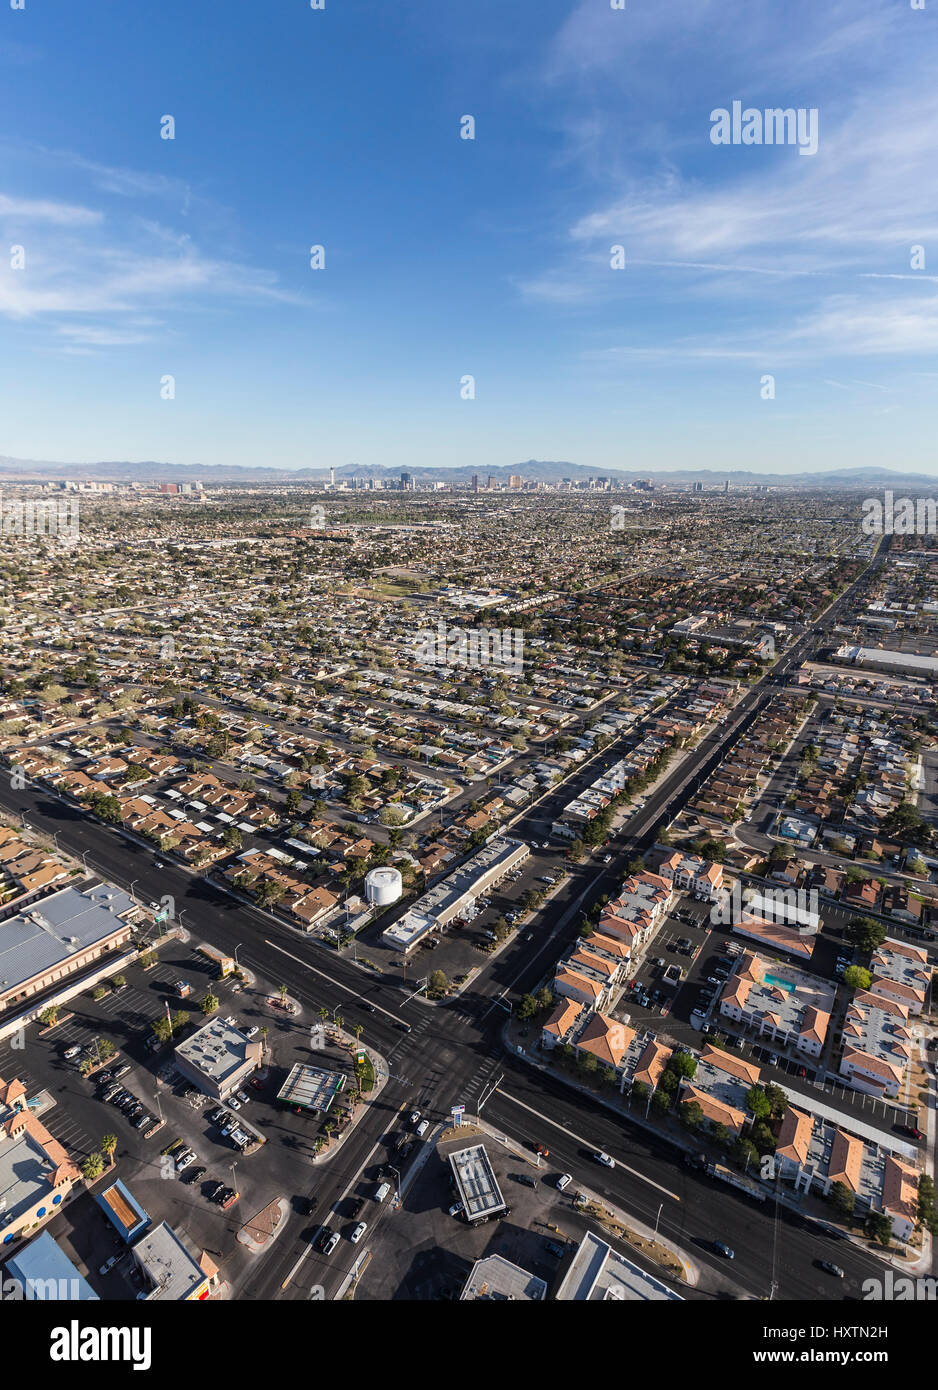 Las Vegas, Nevada, USA - March 13, 2017:  Aerial view of Las Vegas streets in Southern Nevada. Stock Photo